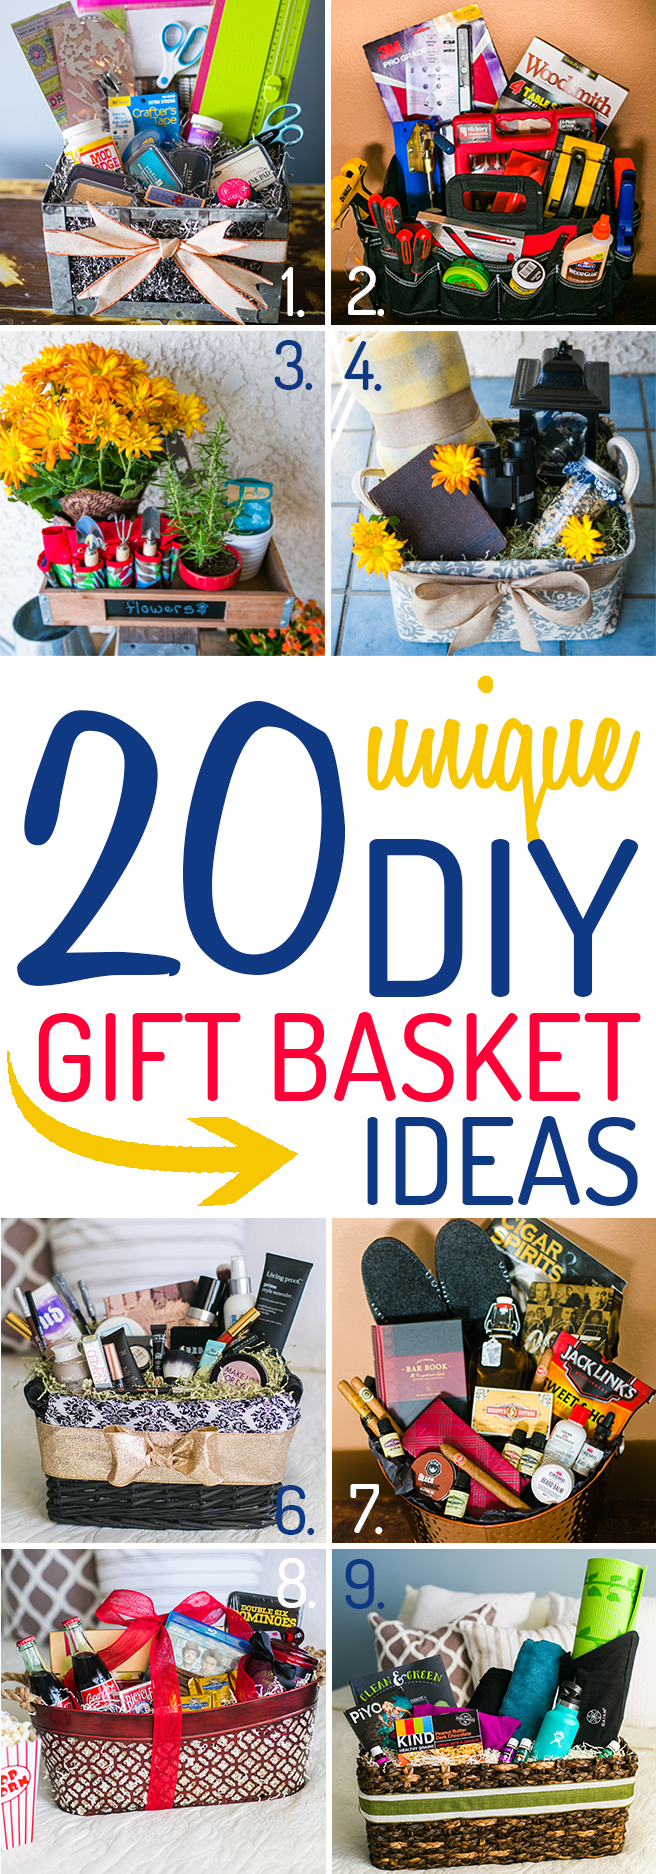 These ideas for a DIY gift basket are unique, and packed with tips from the experts at Wine Country Gift Baskets.